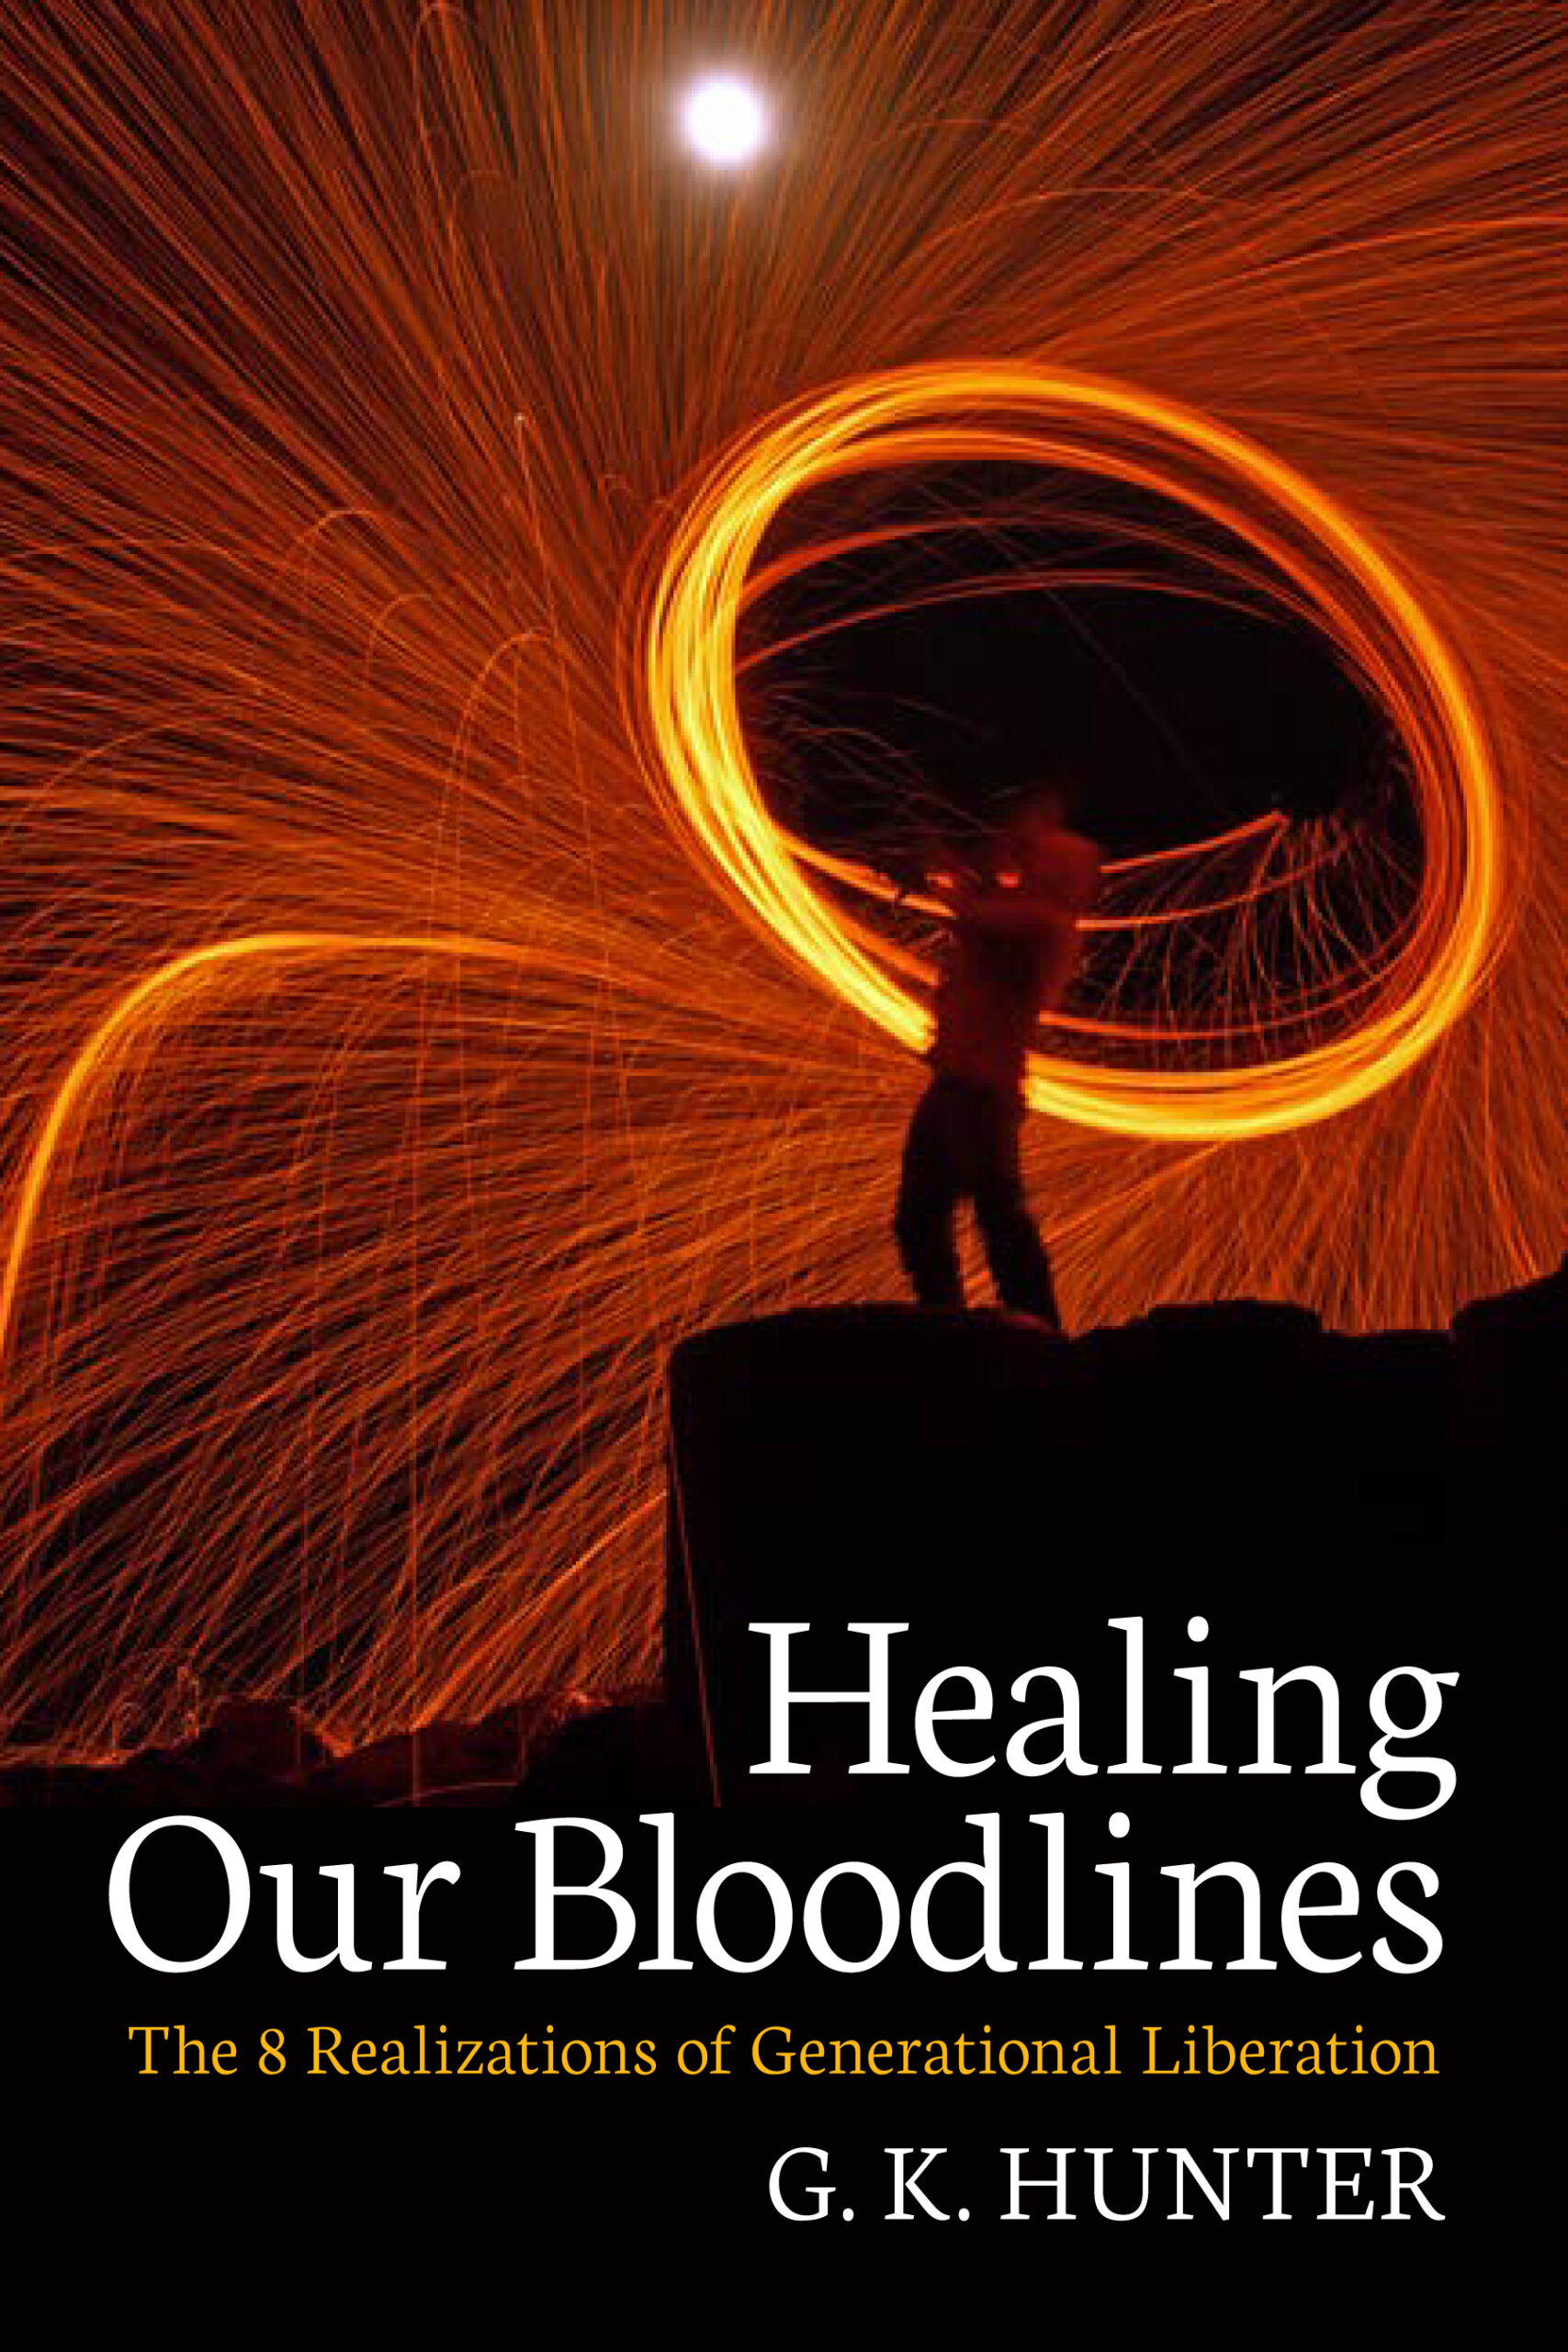 Healing Our Bloodlines book by self help author G. K. Hunter